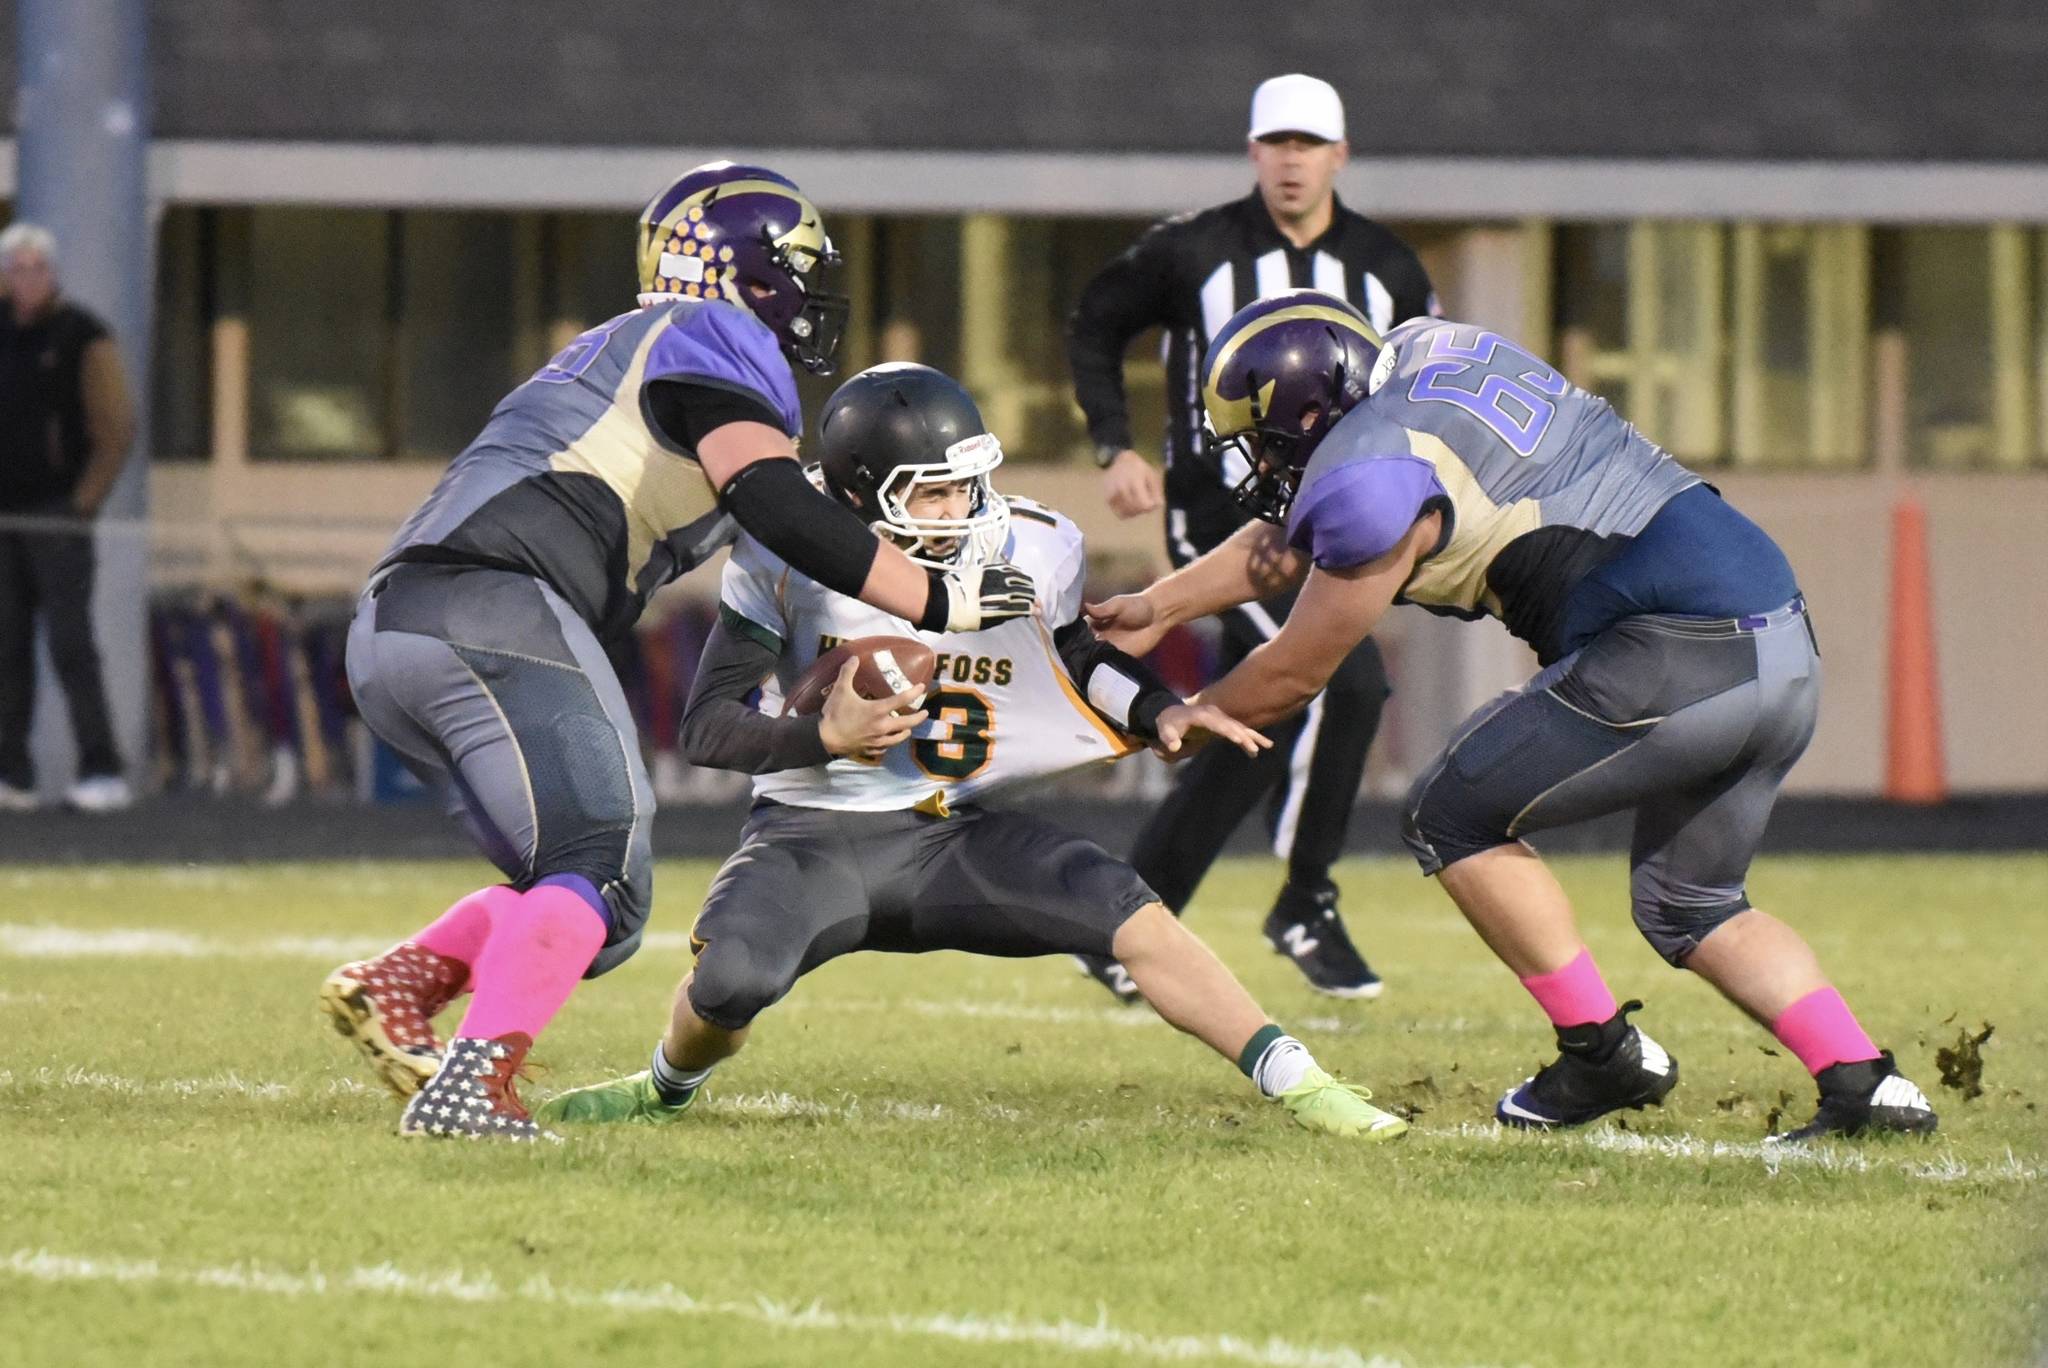 # 68 Weston Swirtz and #65 Ty Vague wrap up the Falcons quarterback for a yardage loss. John Stimpson/Contributed photo.